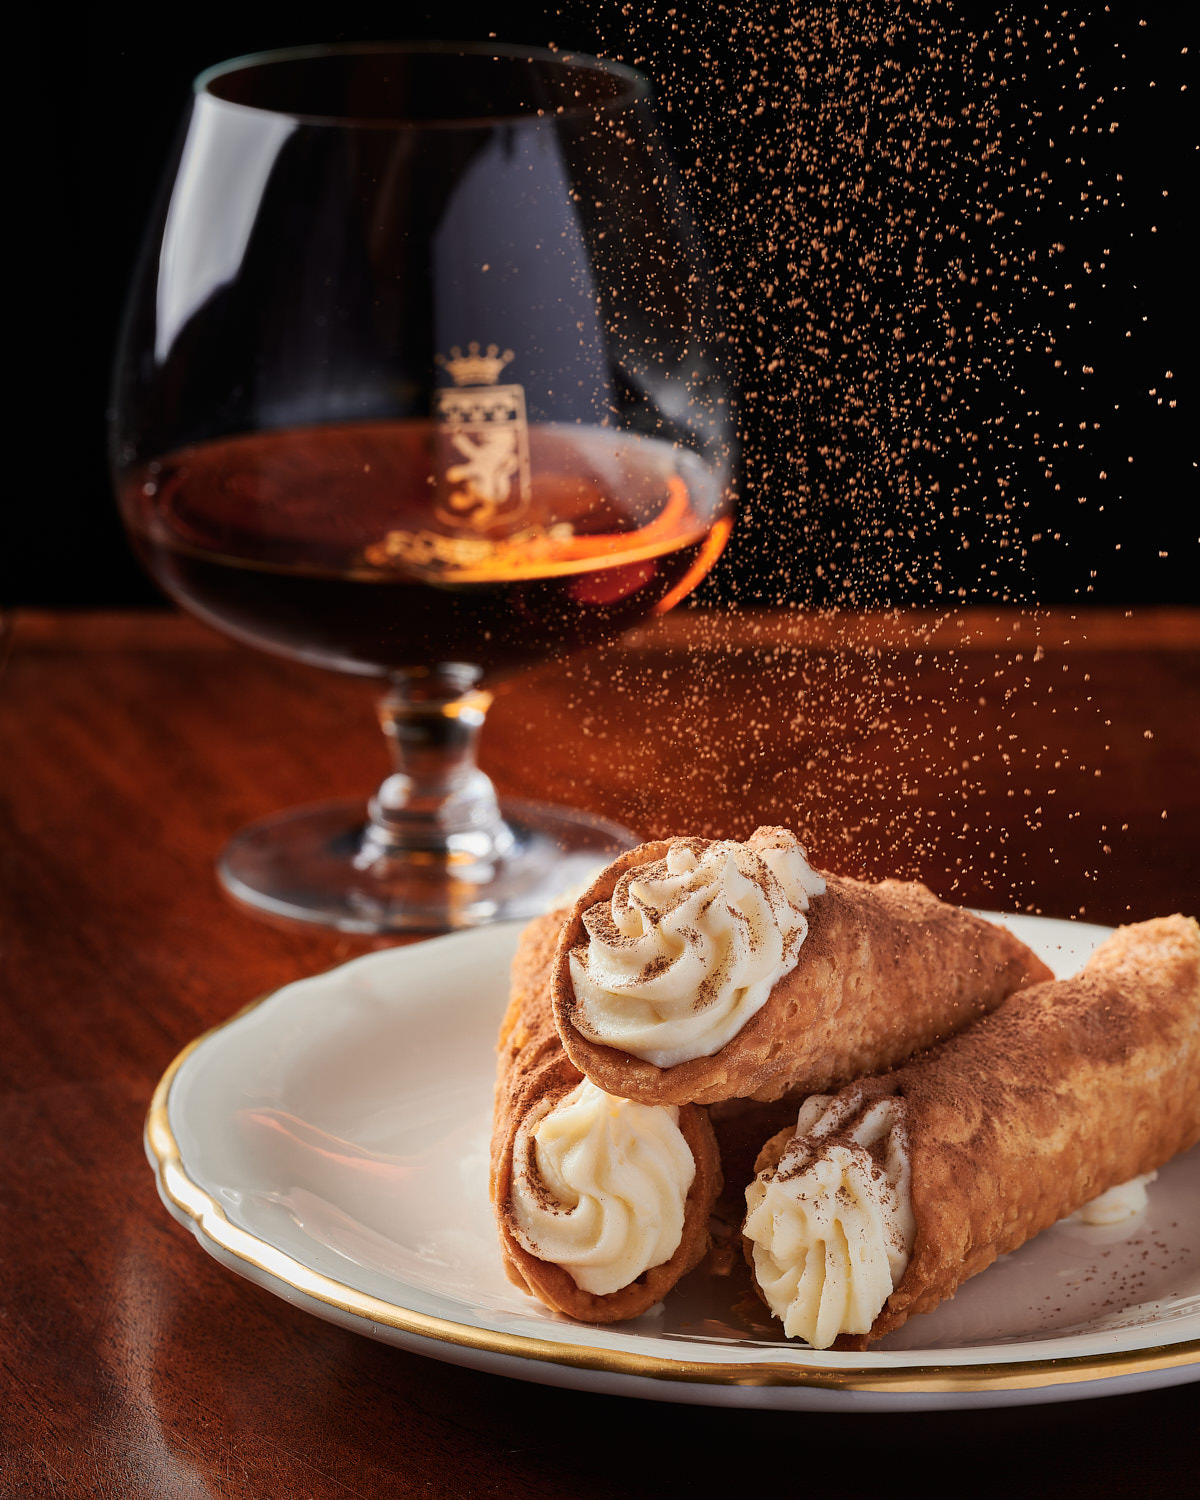 Editorial Cookbook Food Photography of Cannolis